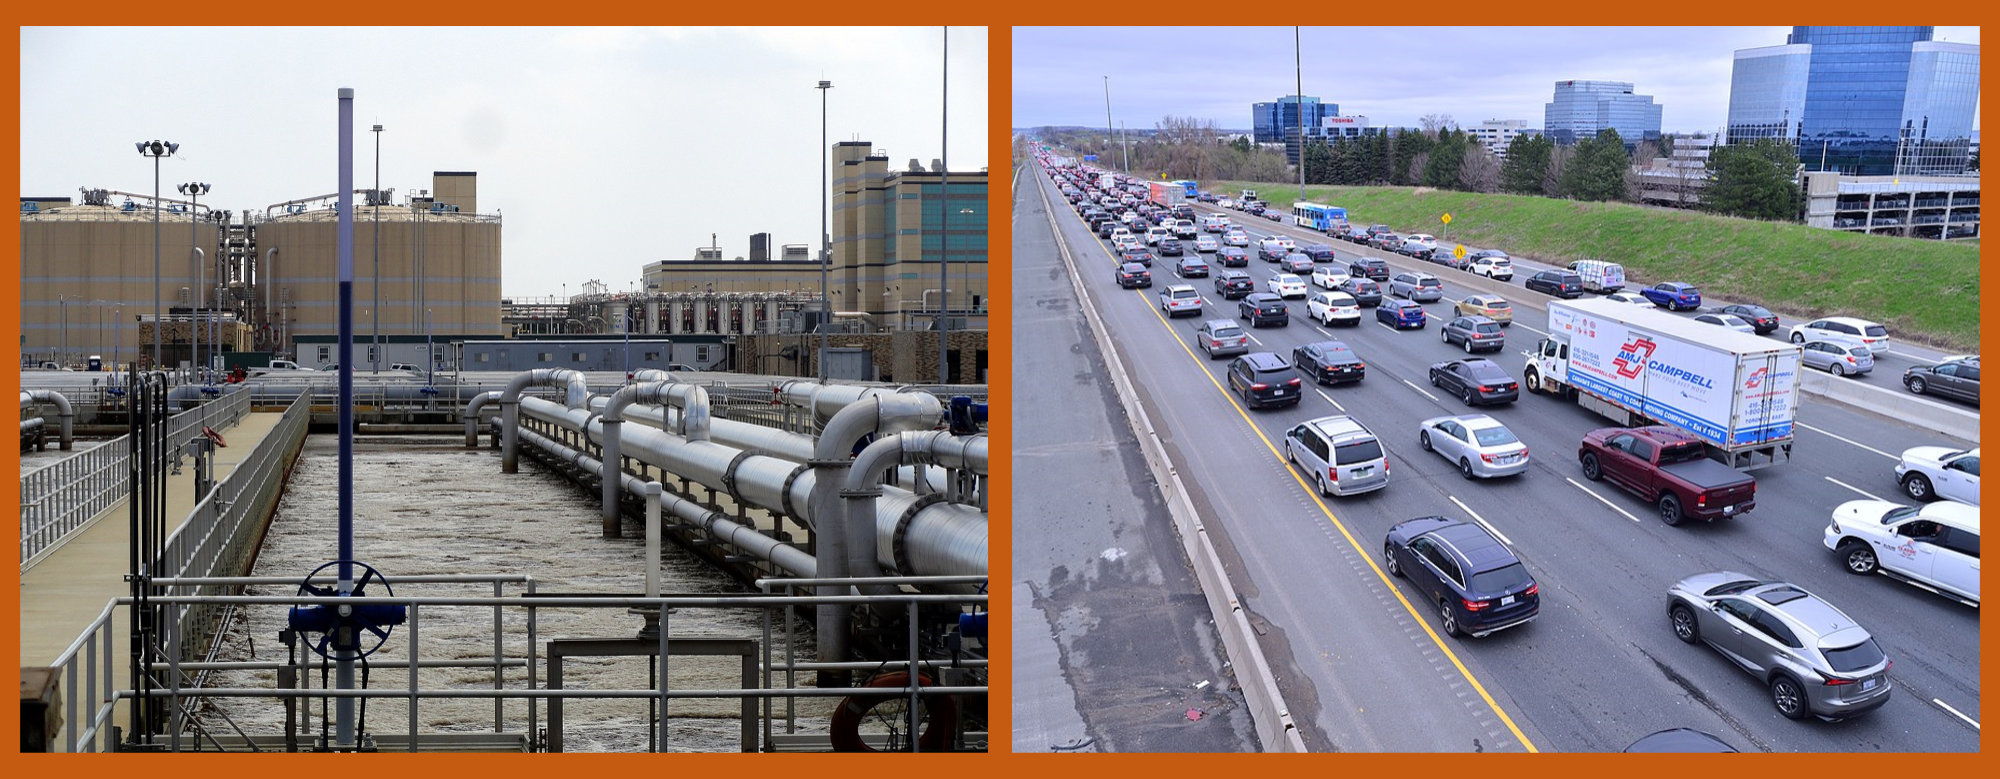 Photos of a wastewater treatment plant and cars in a highway traffic jam.